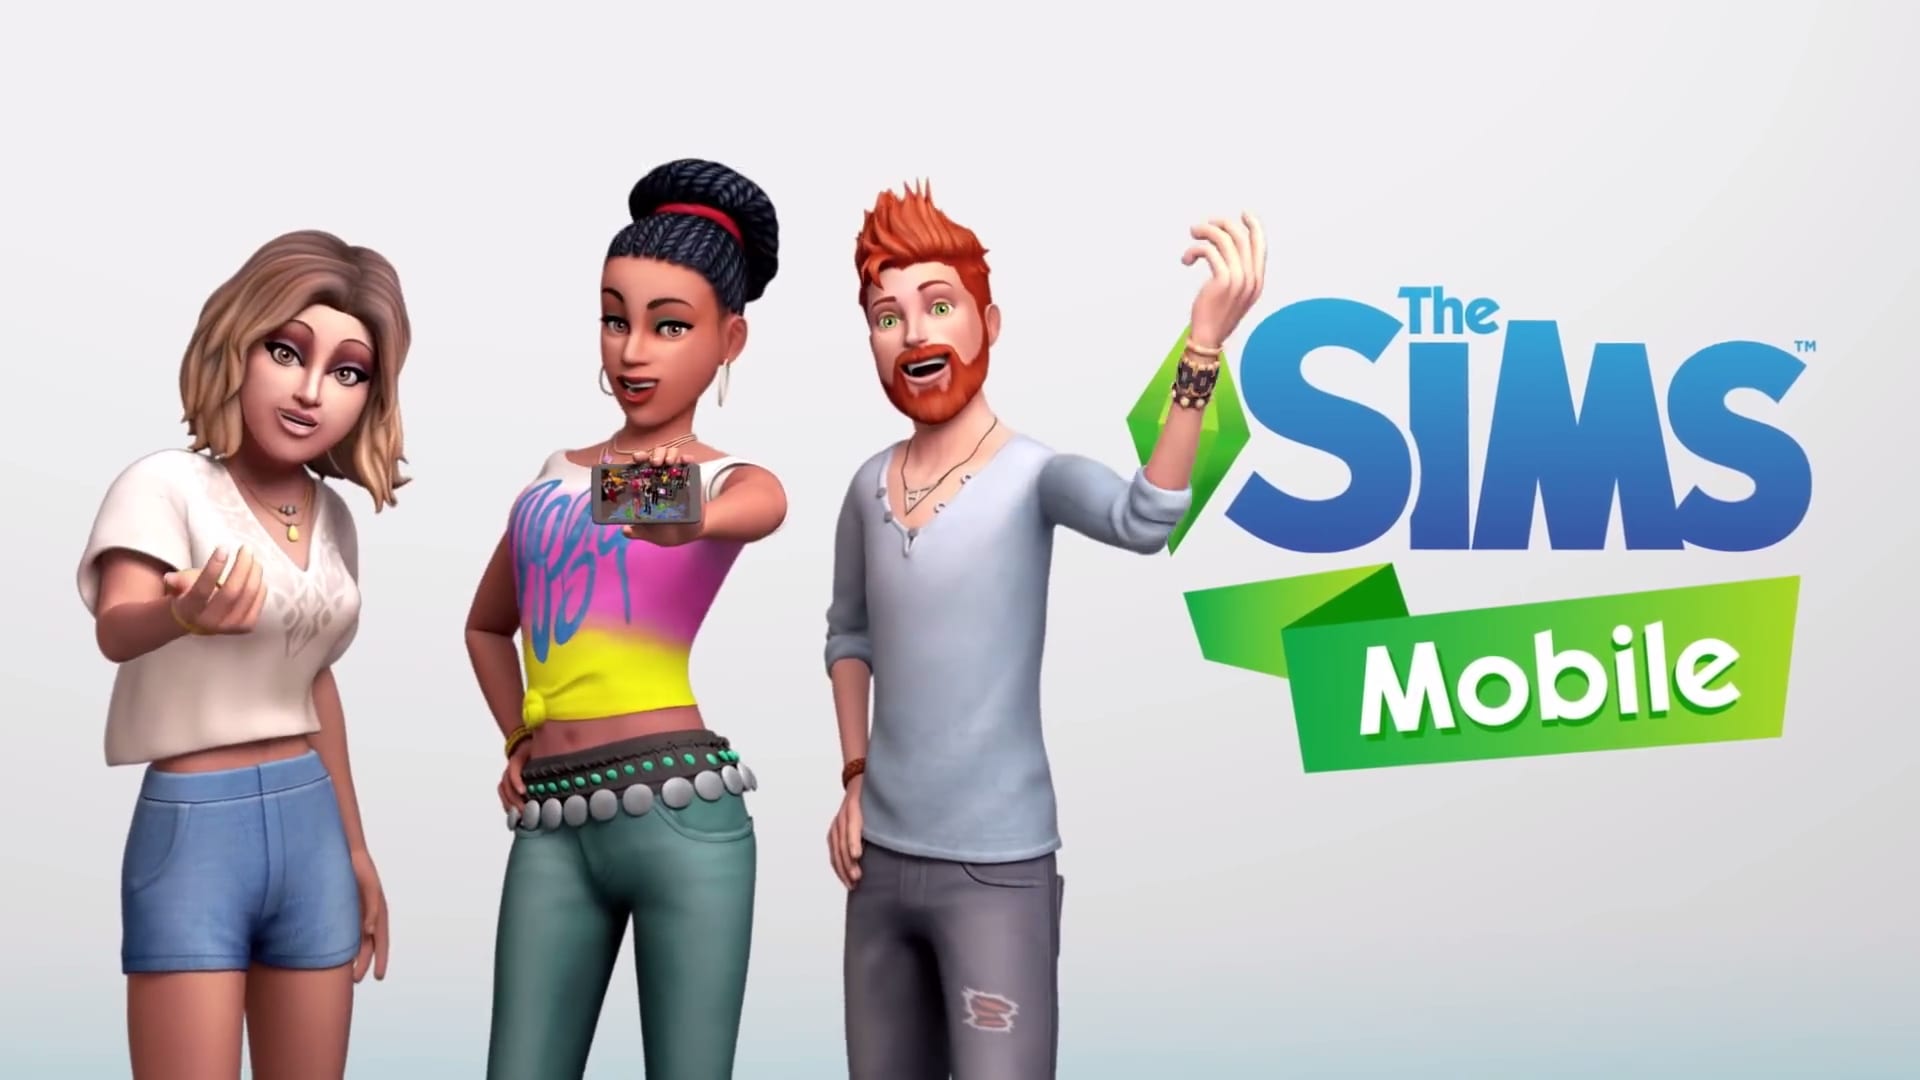 The Sims Mobile (@TheSimsMobile) / X